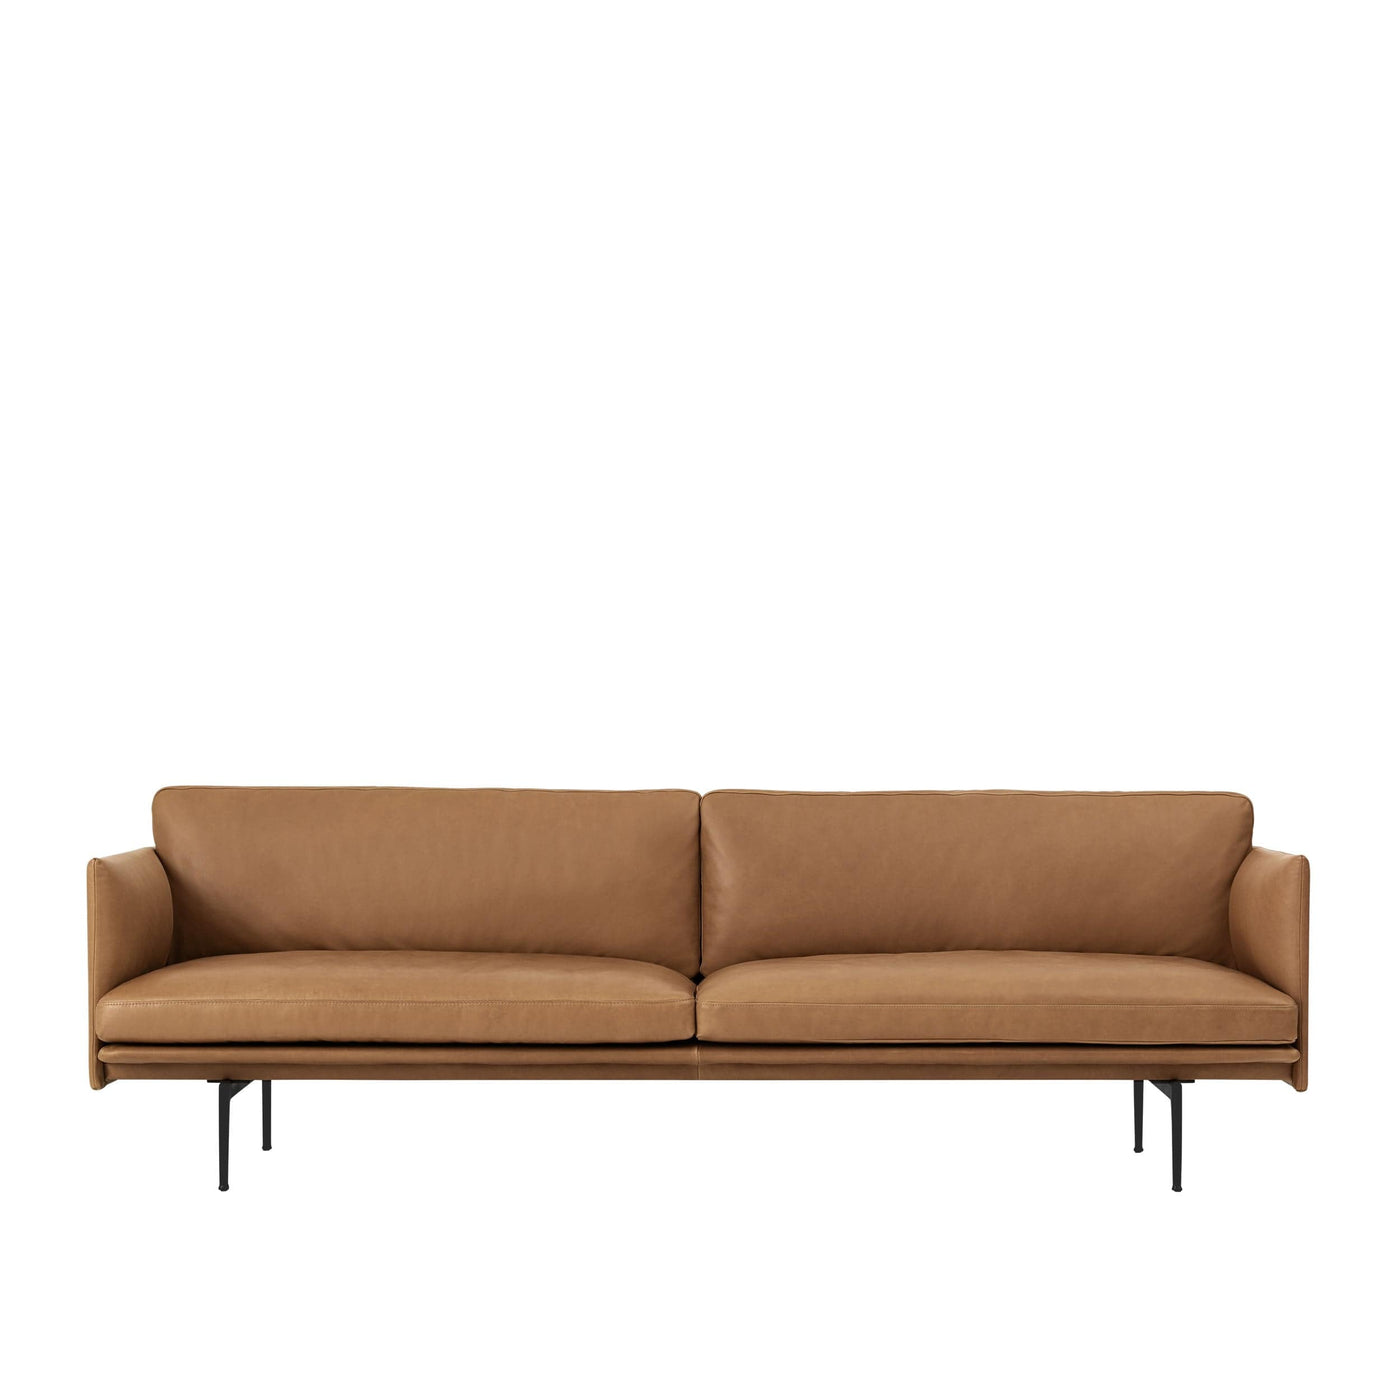 Muuto Outline 3 seater sofa in cognac refine leather. Made to order from someday designs